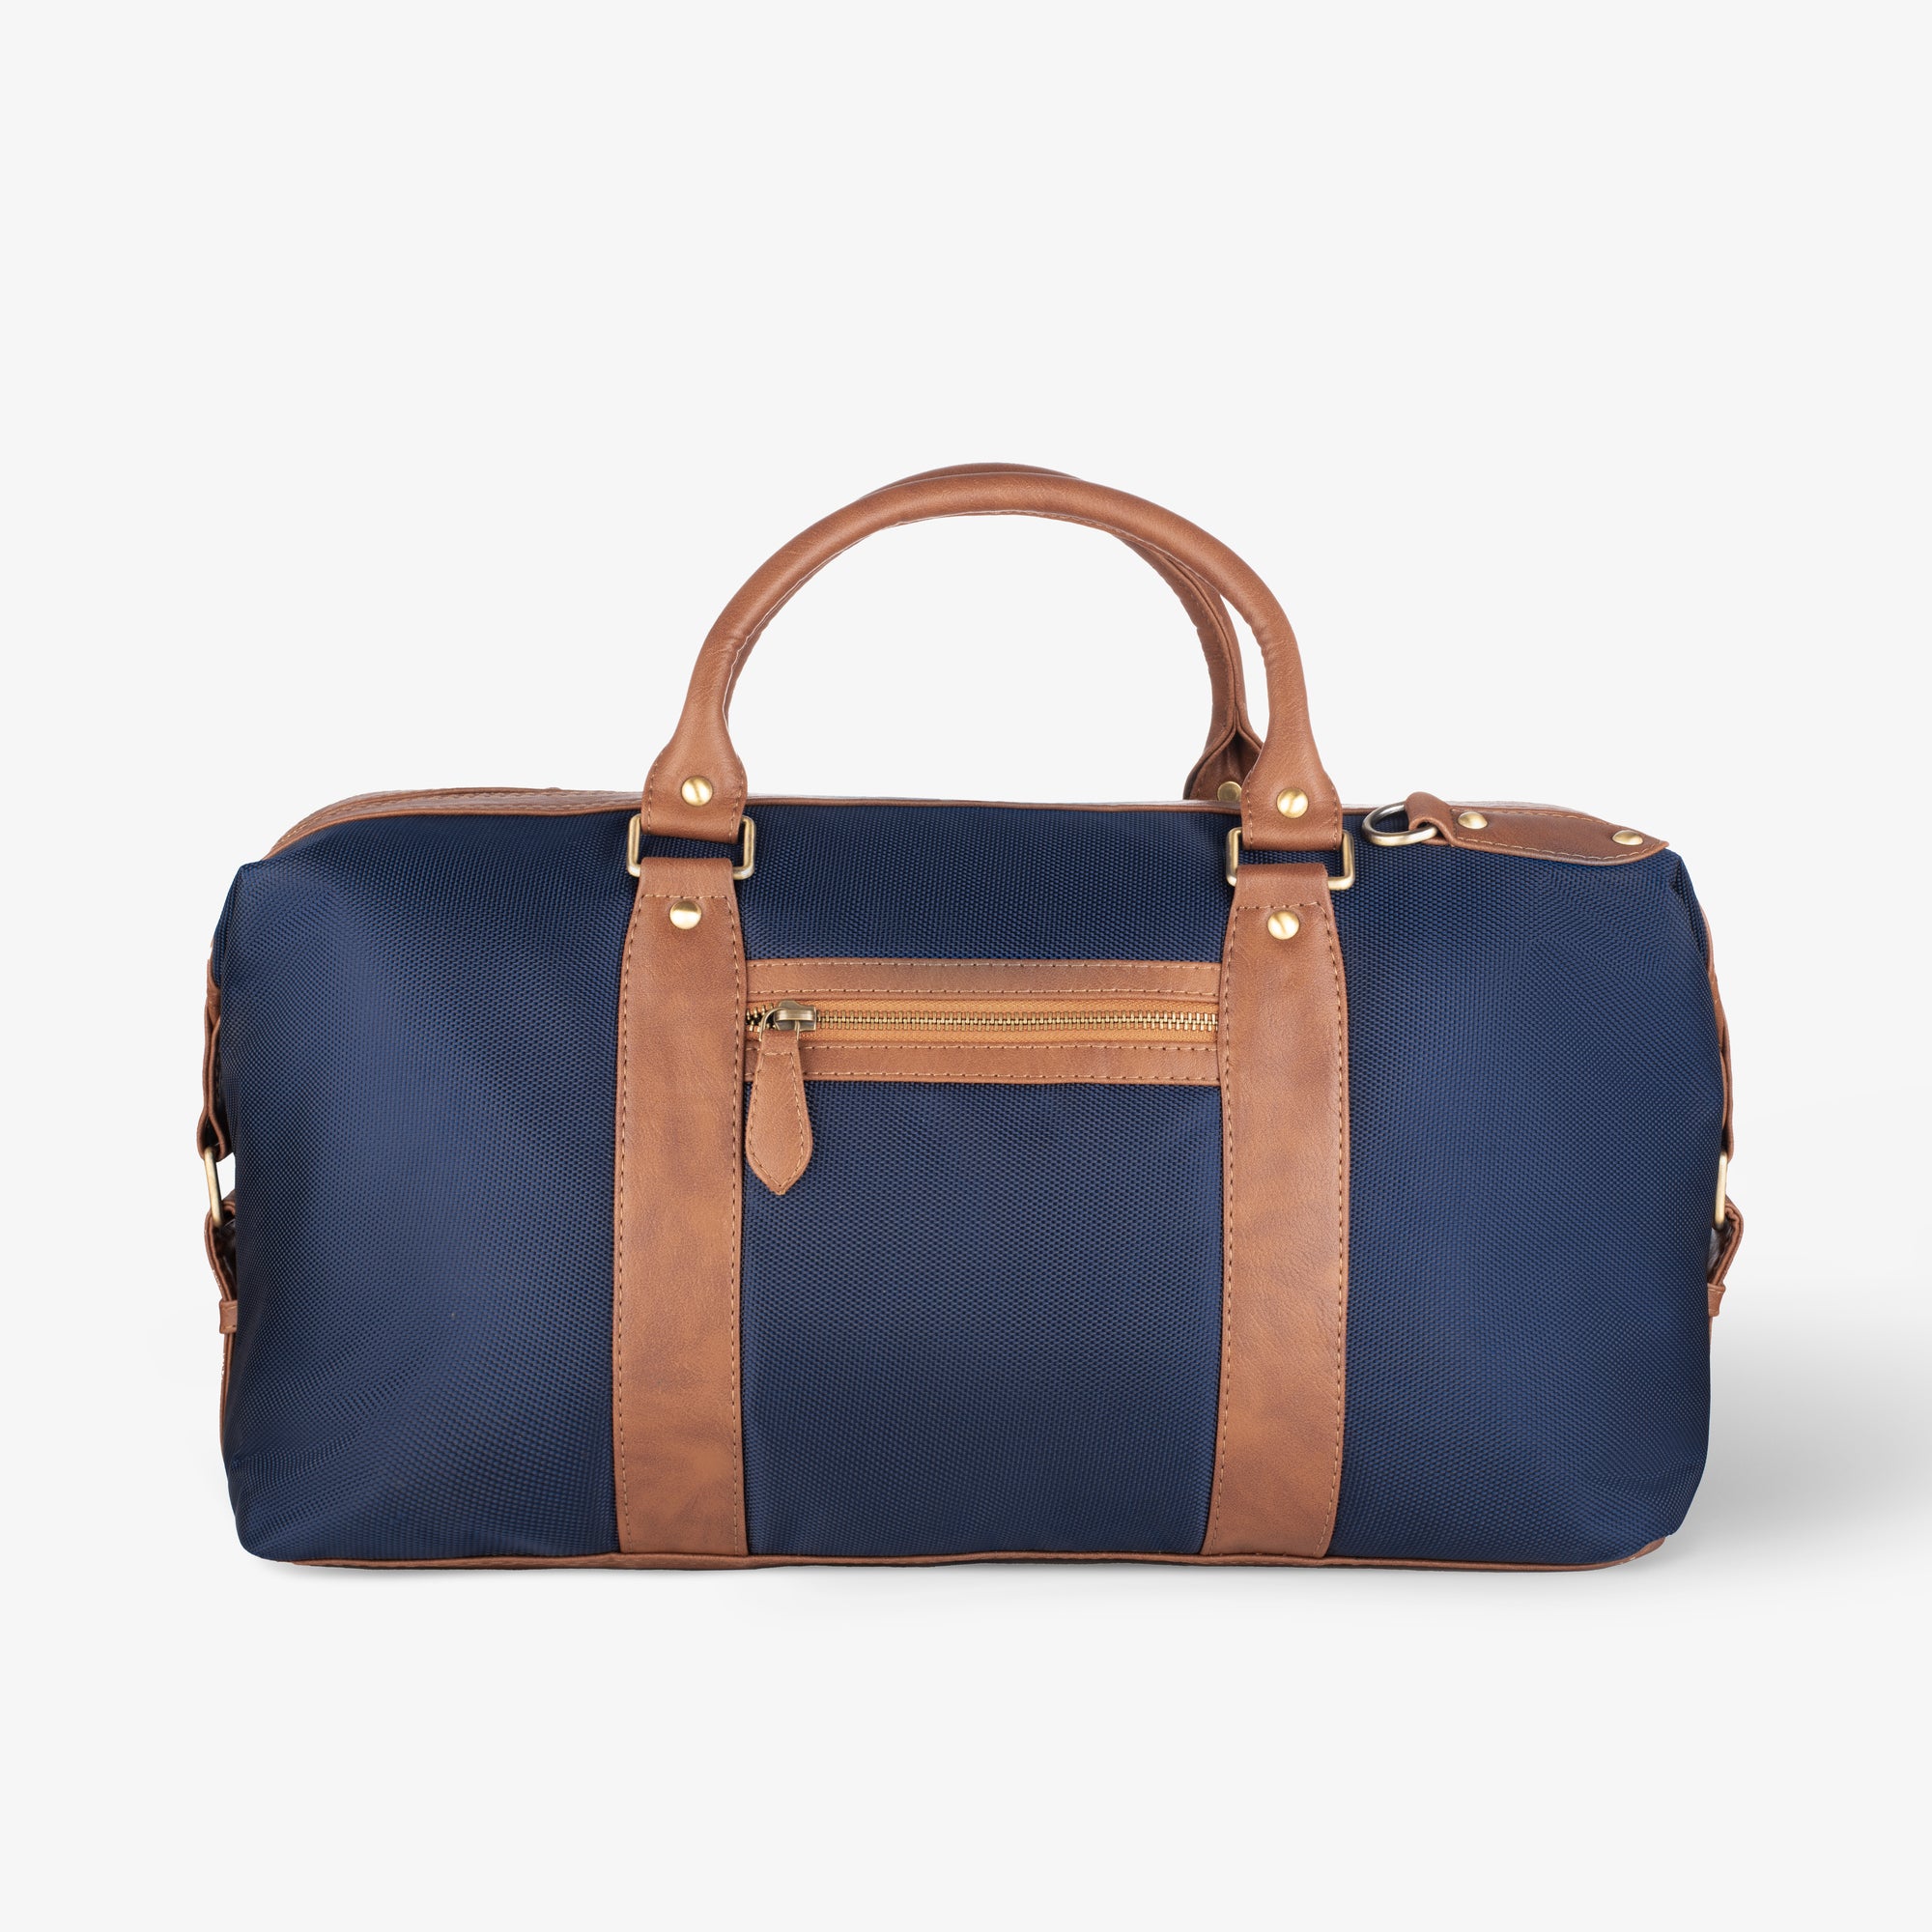 Celio Navy Duffle Bag OS in Hyderabad at best price by Celio Store   Justdial